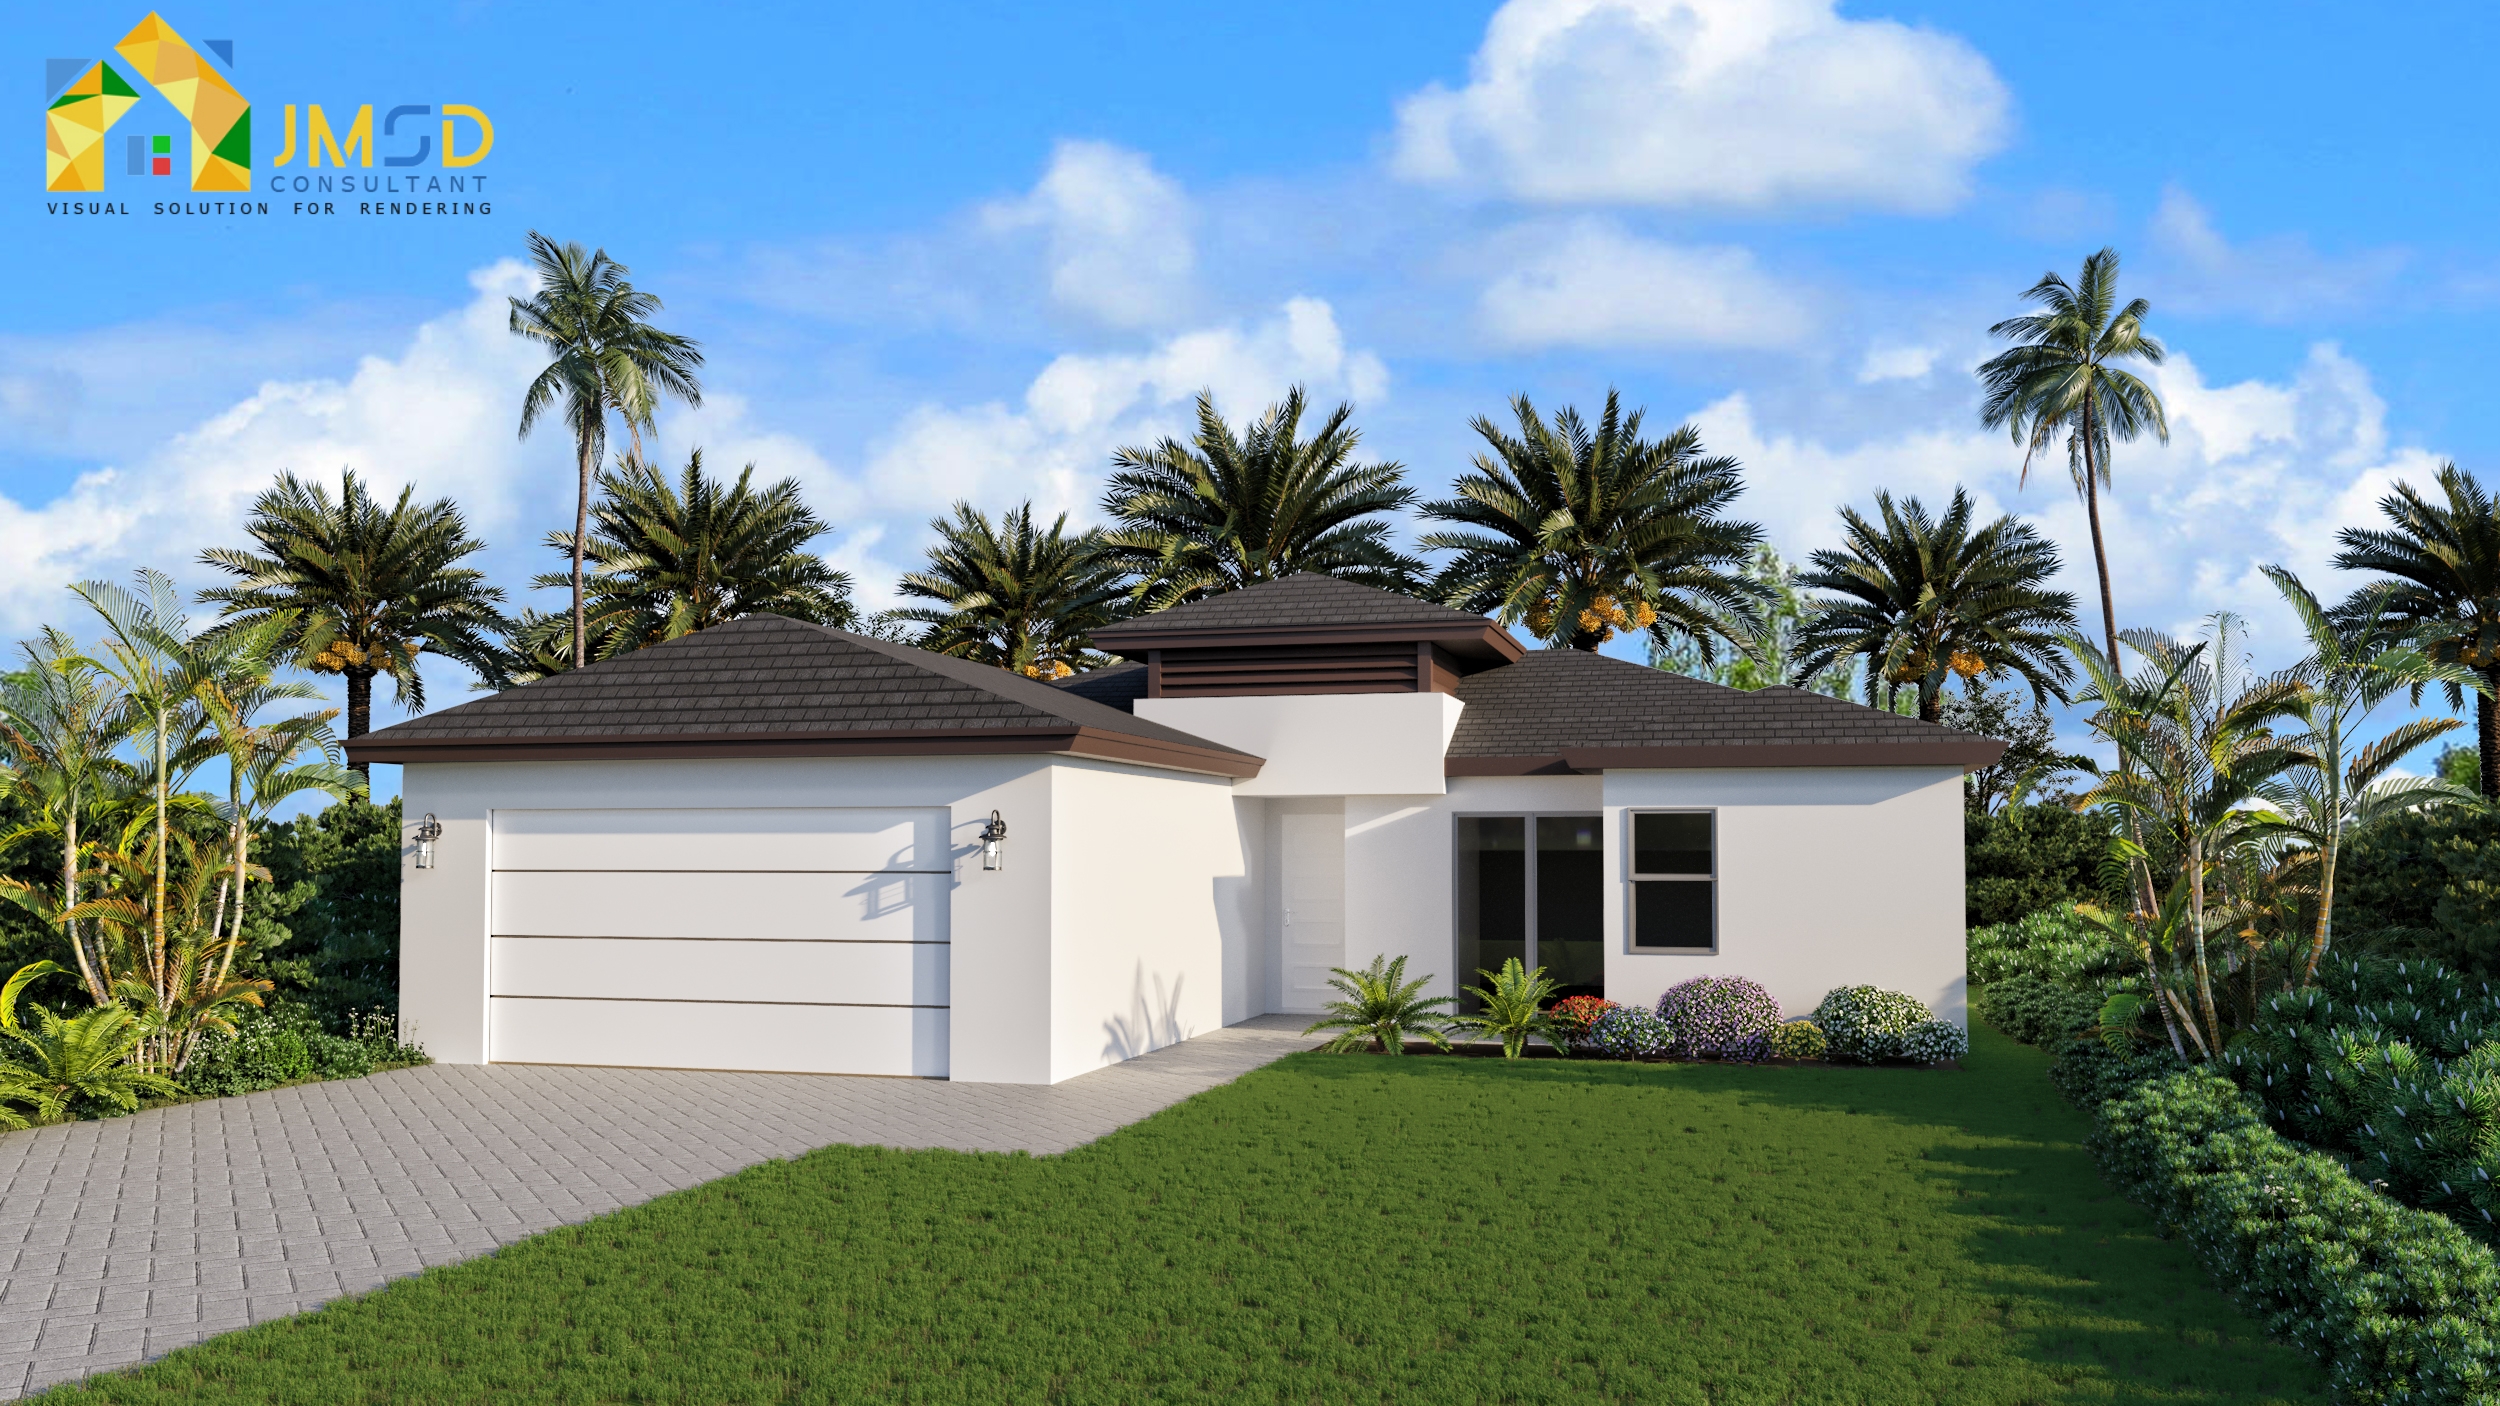 Architectural Visualization and 3D Rendering Services Naples Florida